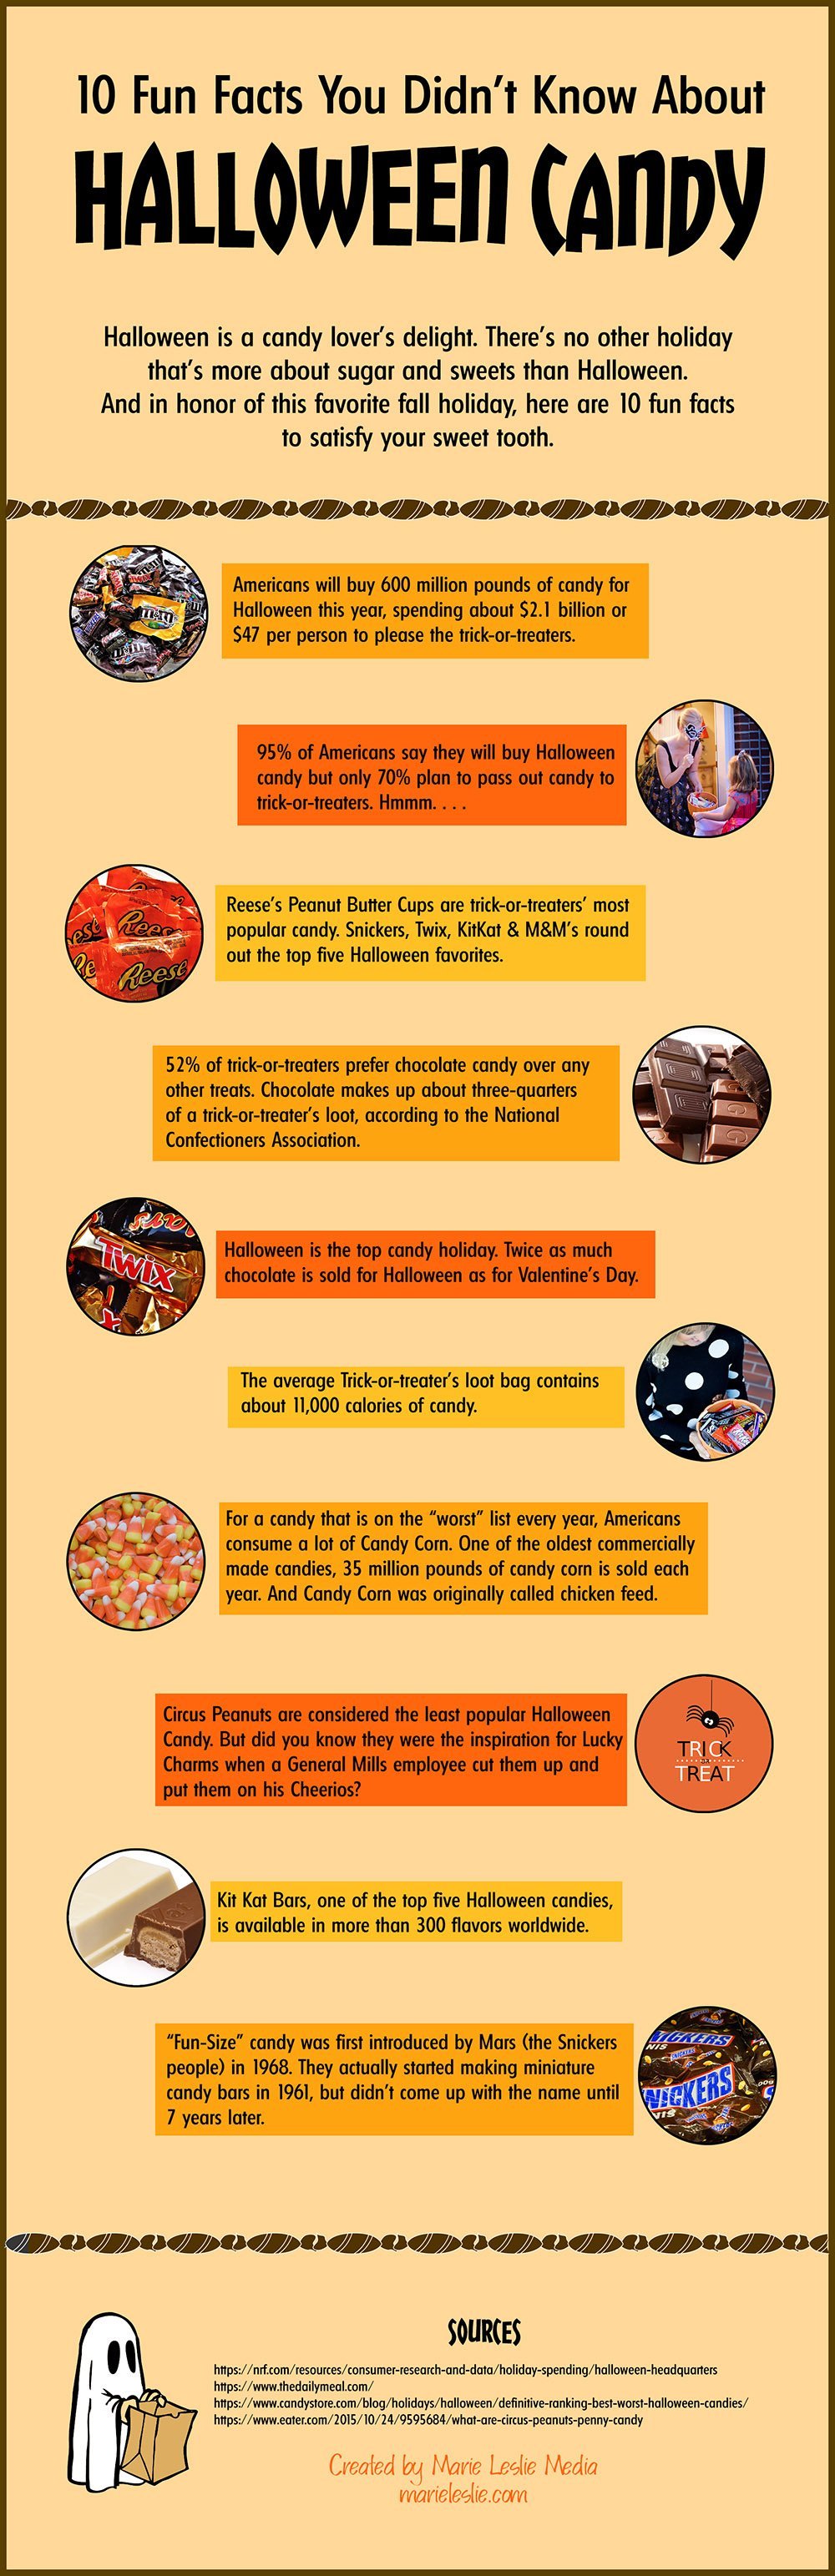 10 Fun Things You Didn't Know About Halloween Candy